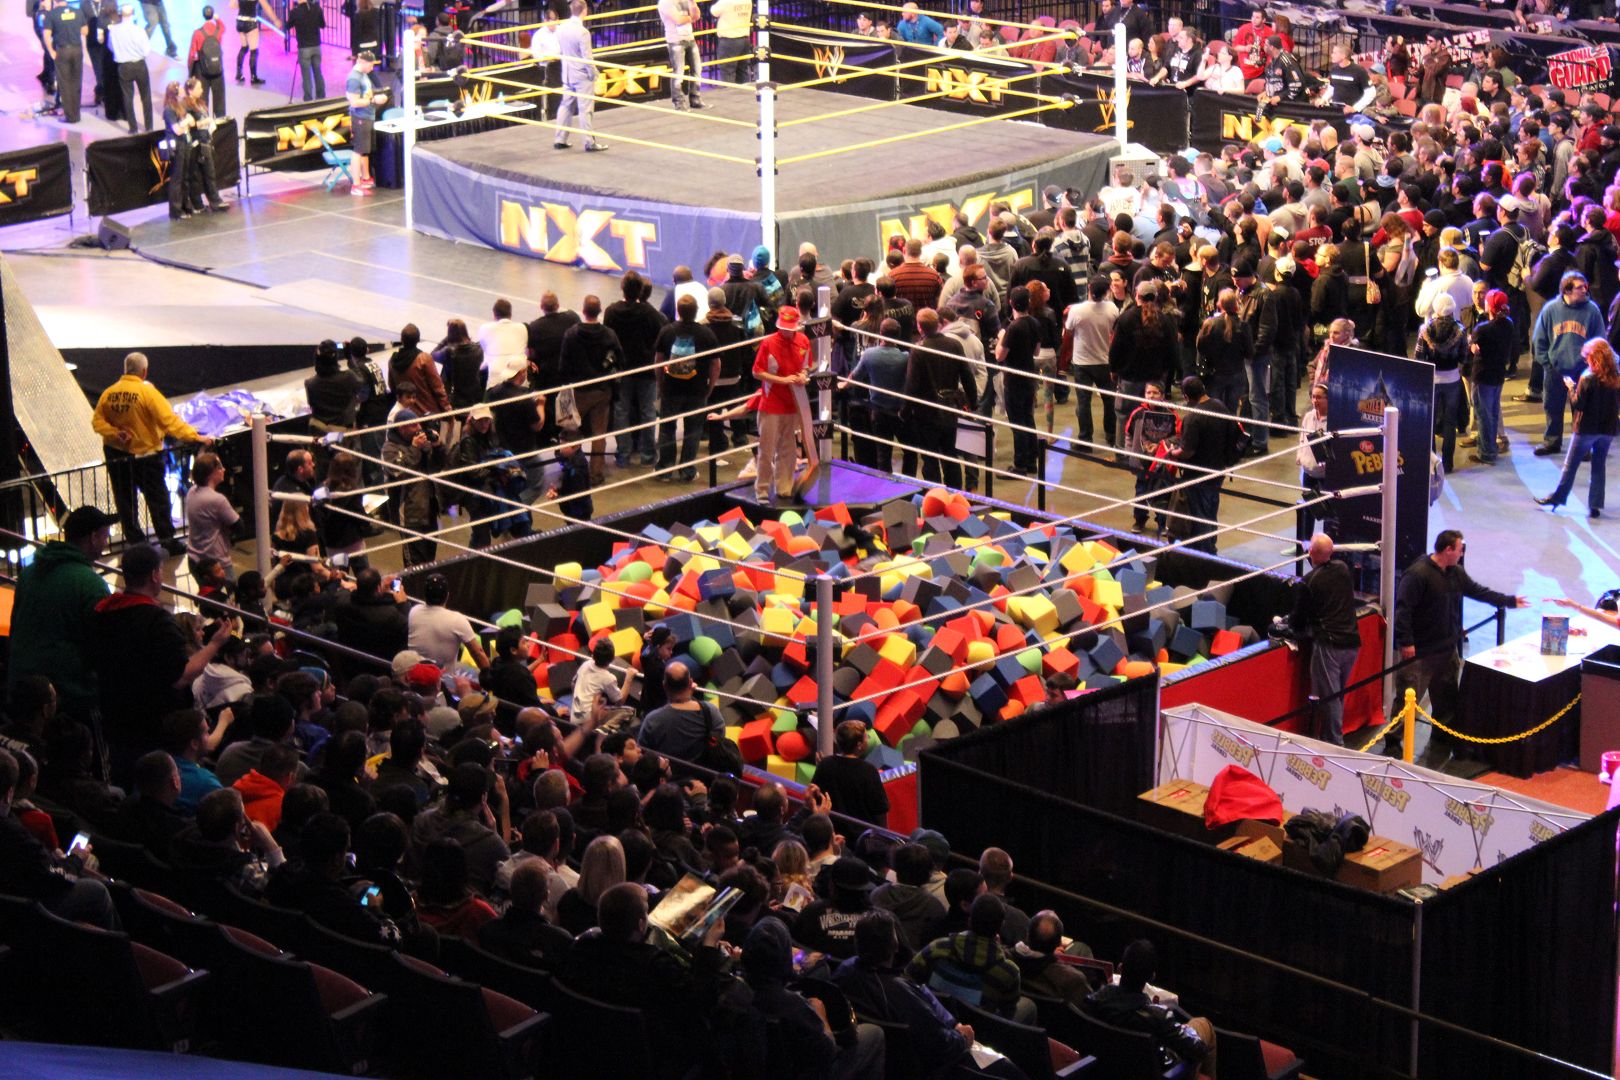 Index of /wp-content/flagallery/blog-wwe-axxess-2013-at-the-izod-center